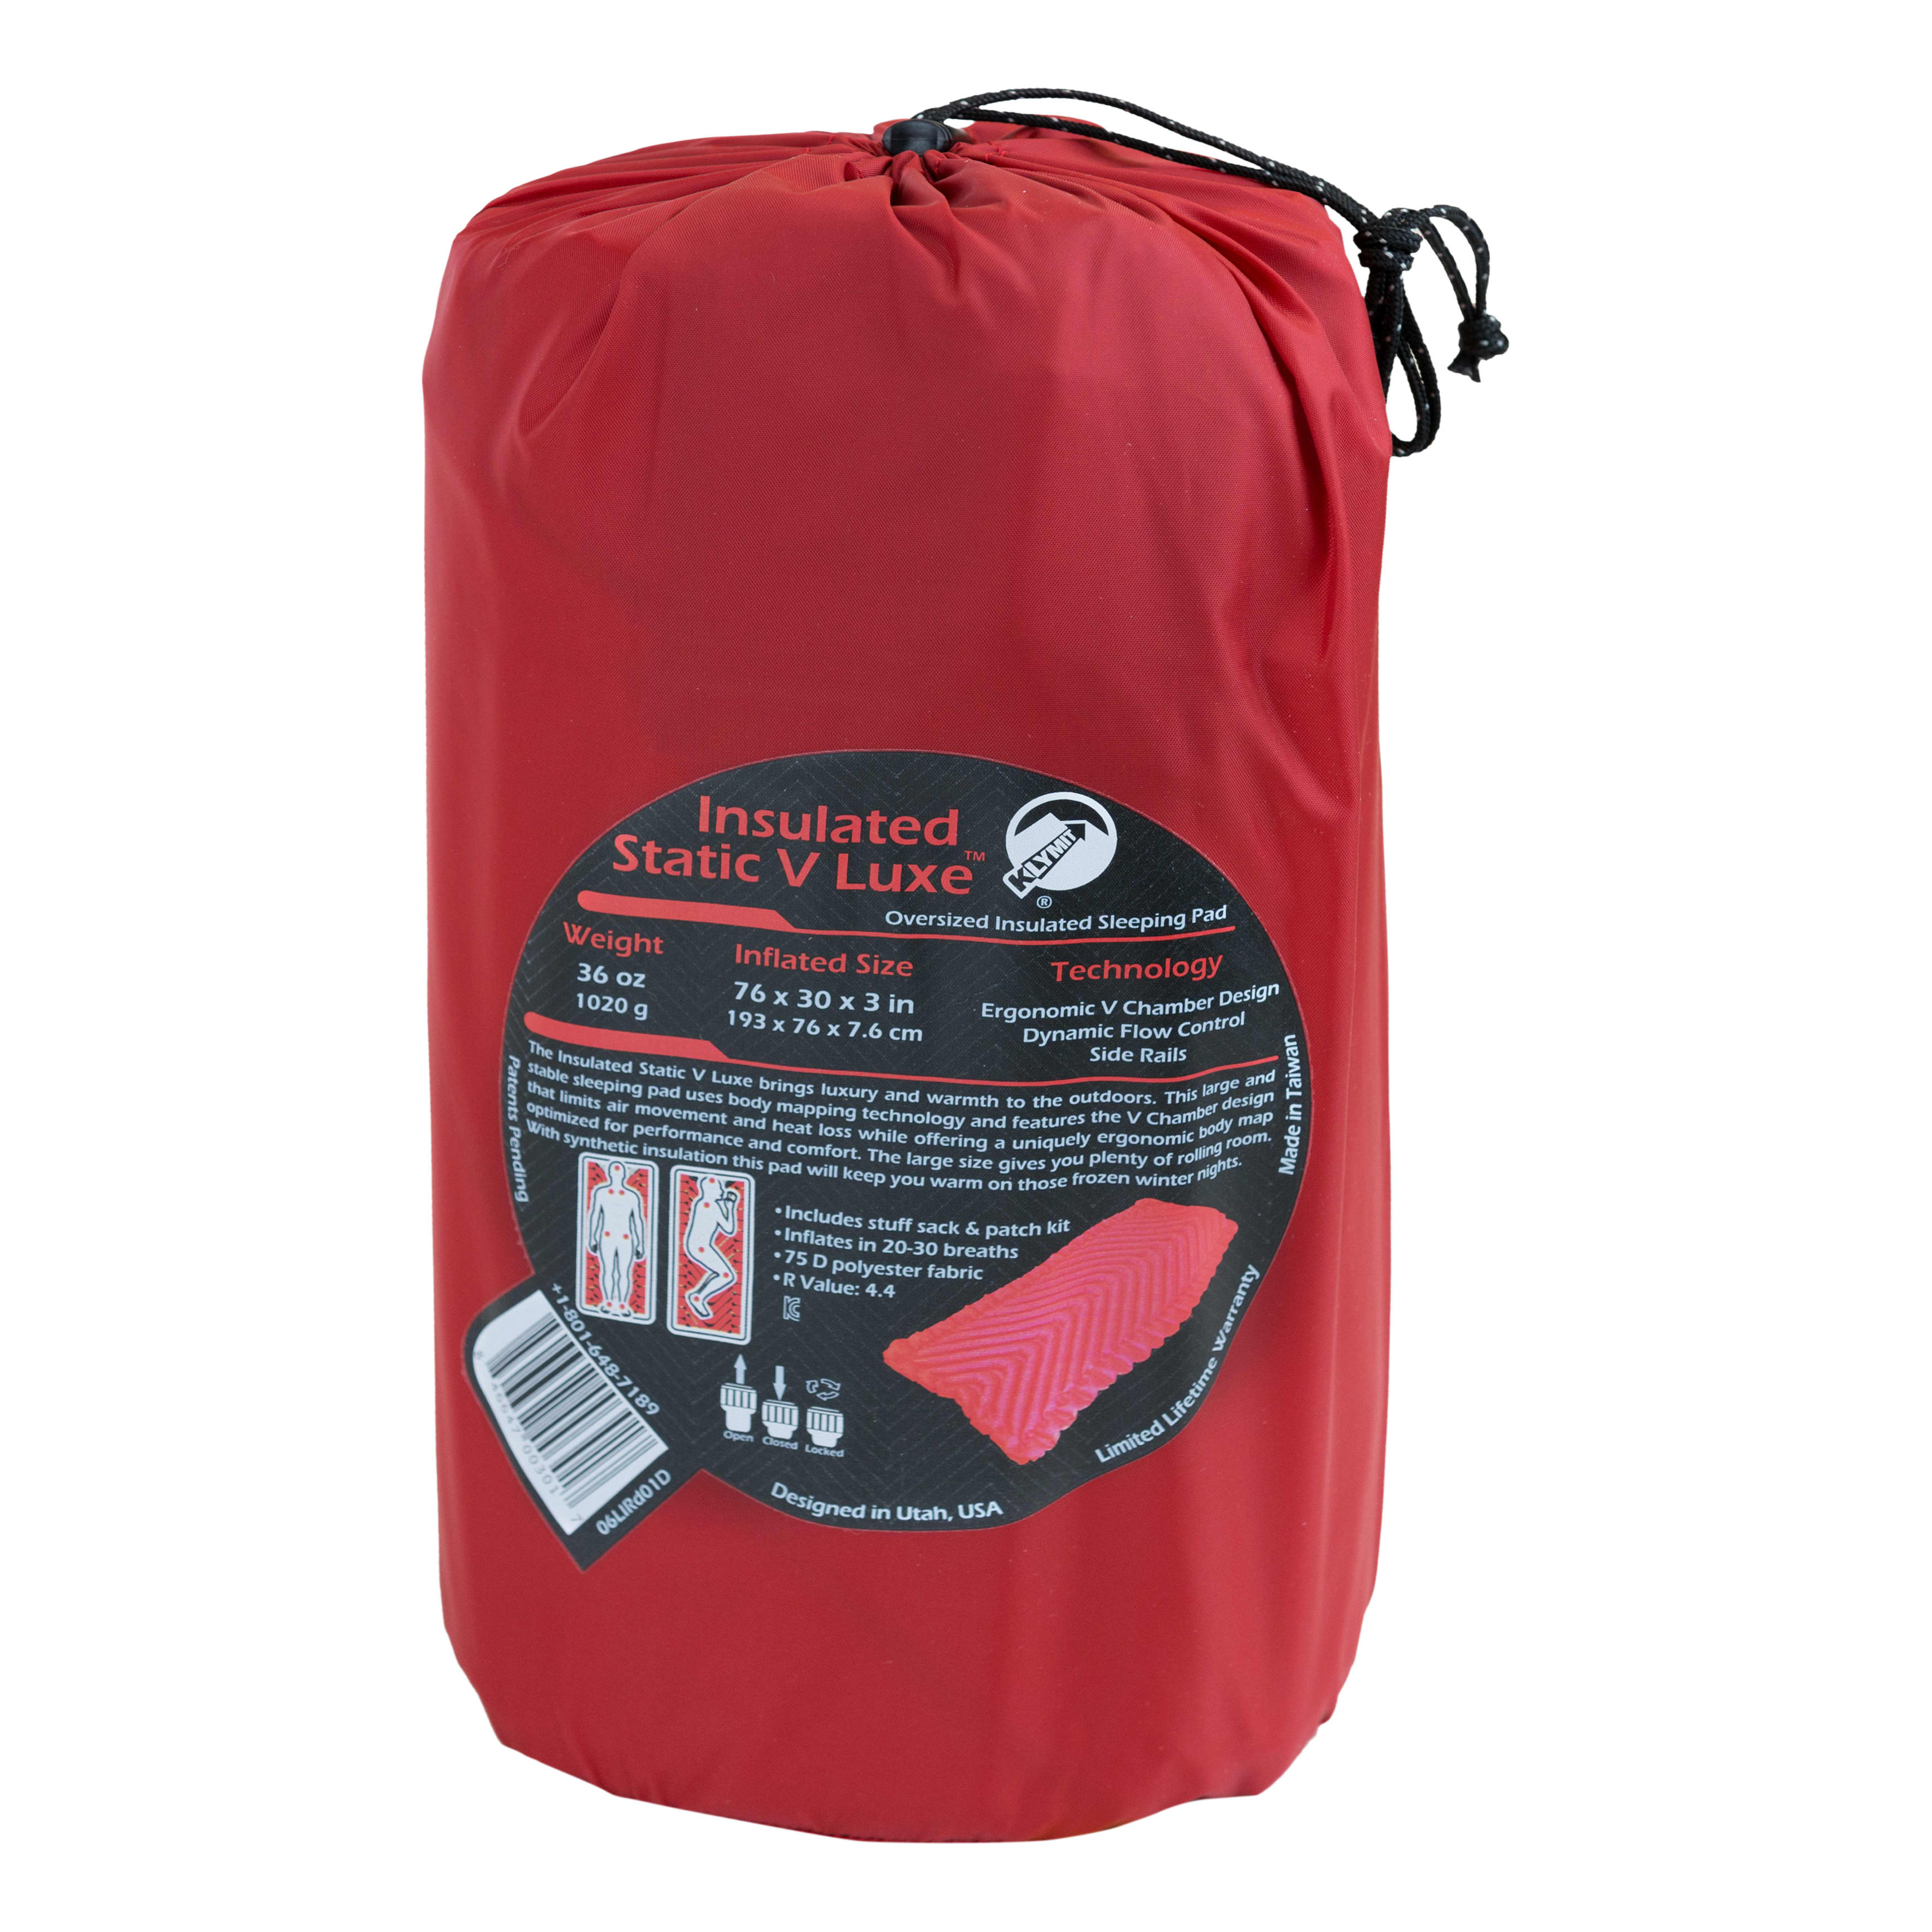 Klymit Insulated Static V Luxe Sleeping Pad - Stuff Sack